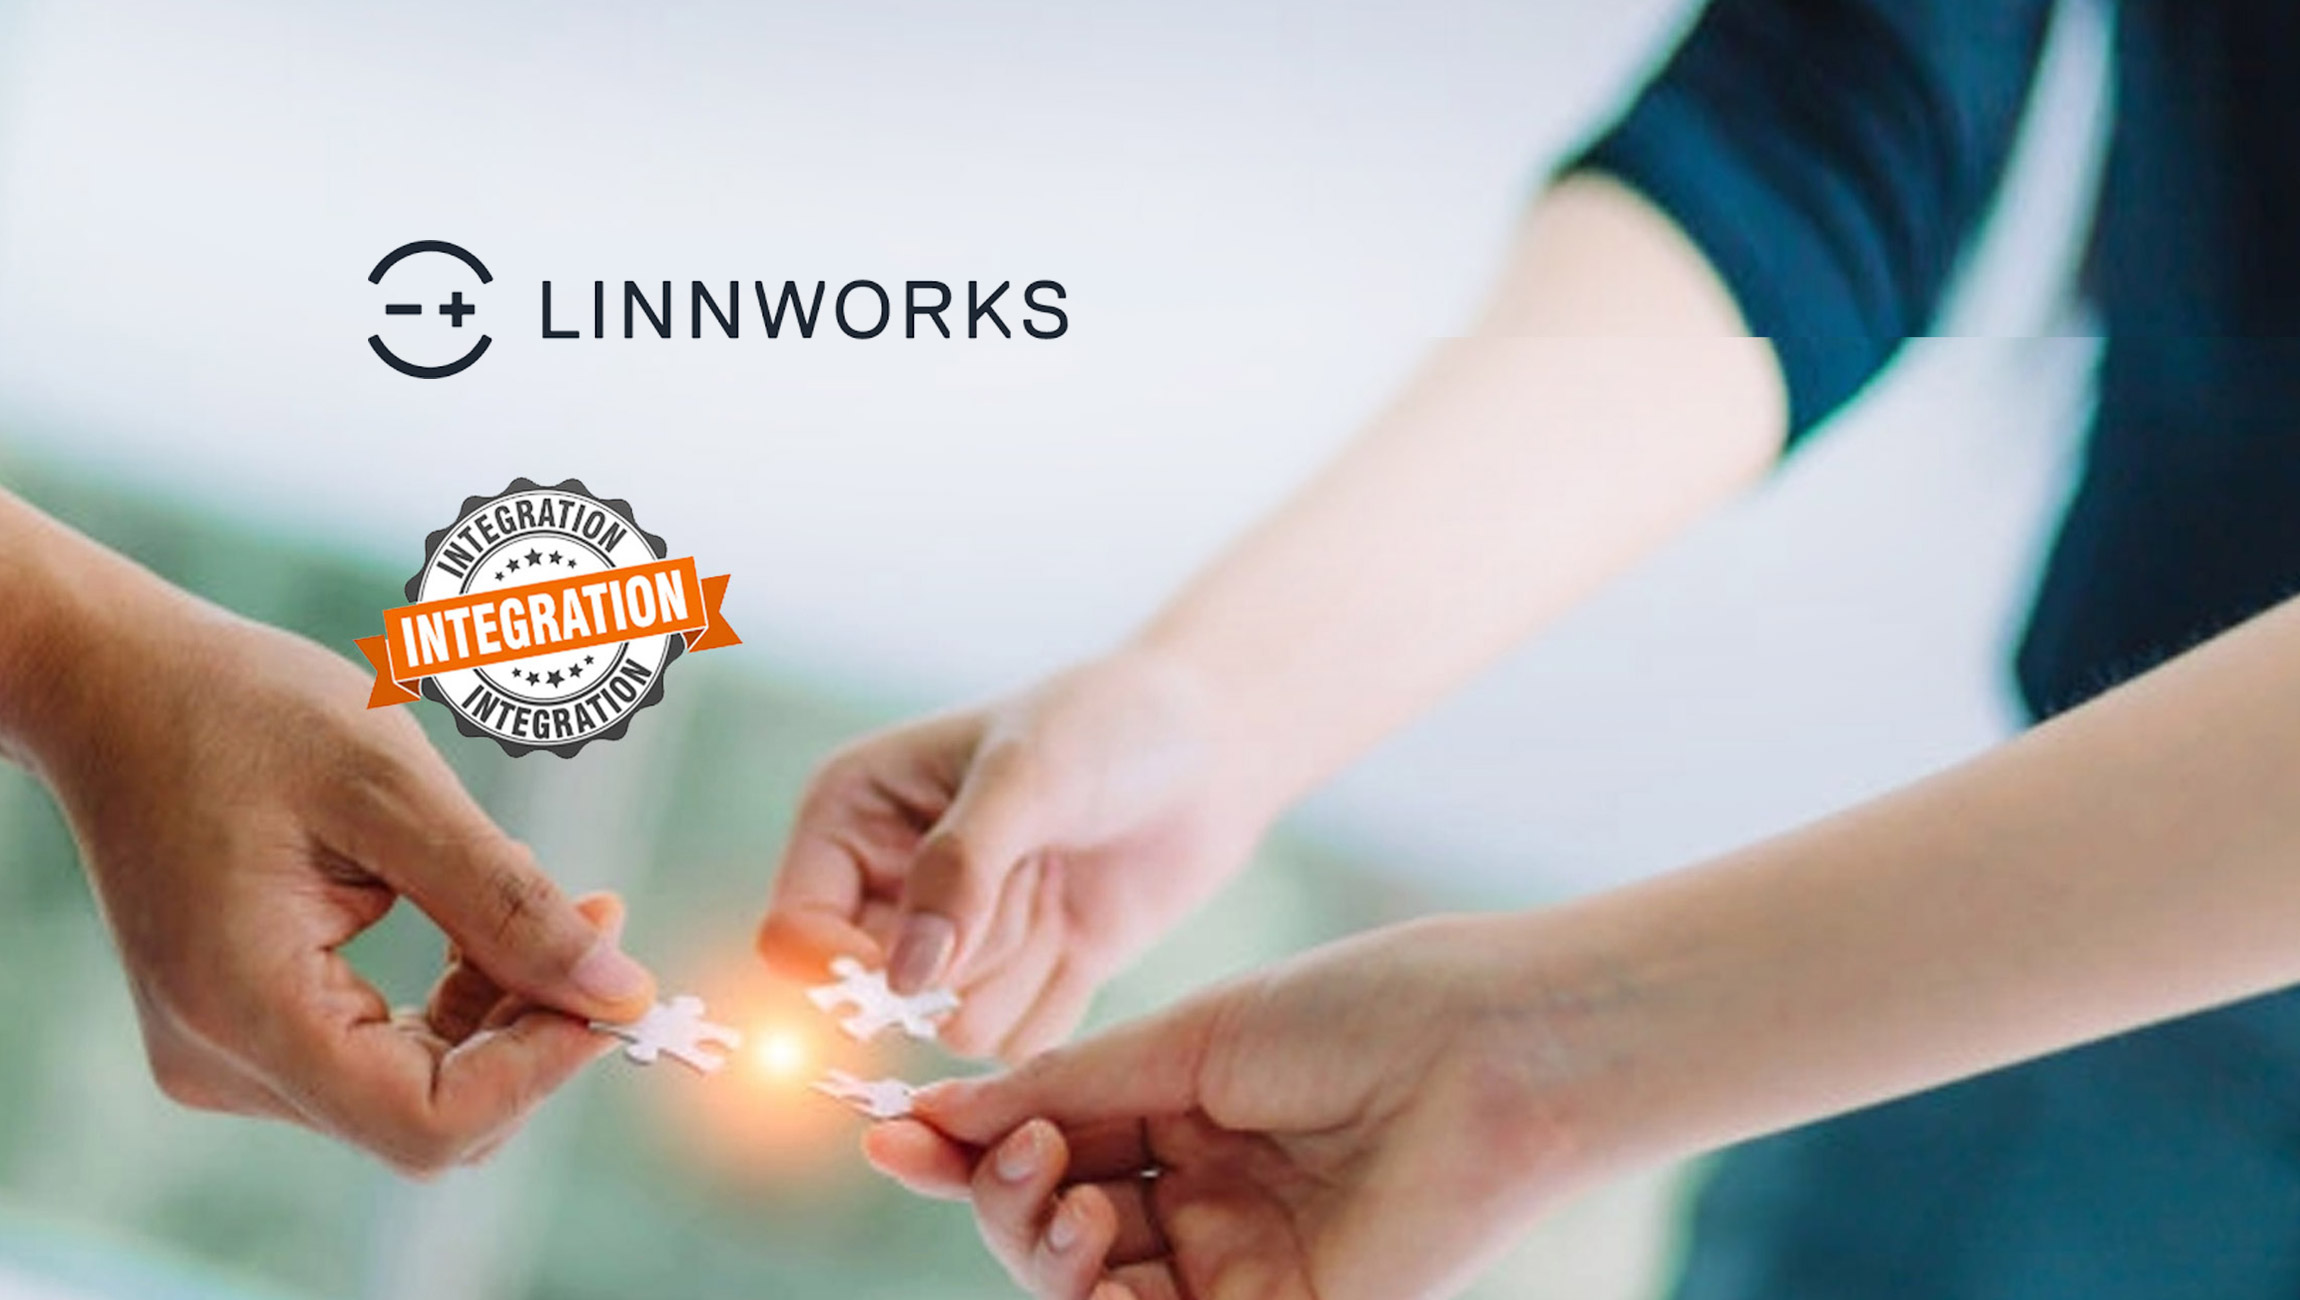 Linnworks Launches Integration with eBay Fulfillment by Orange Connex